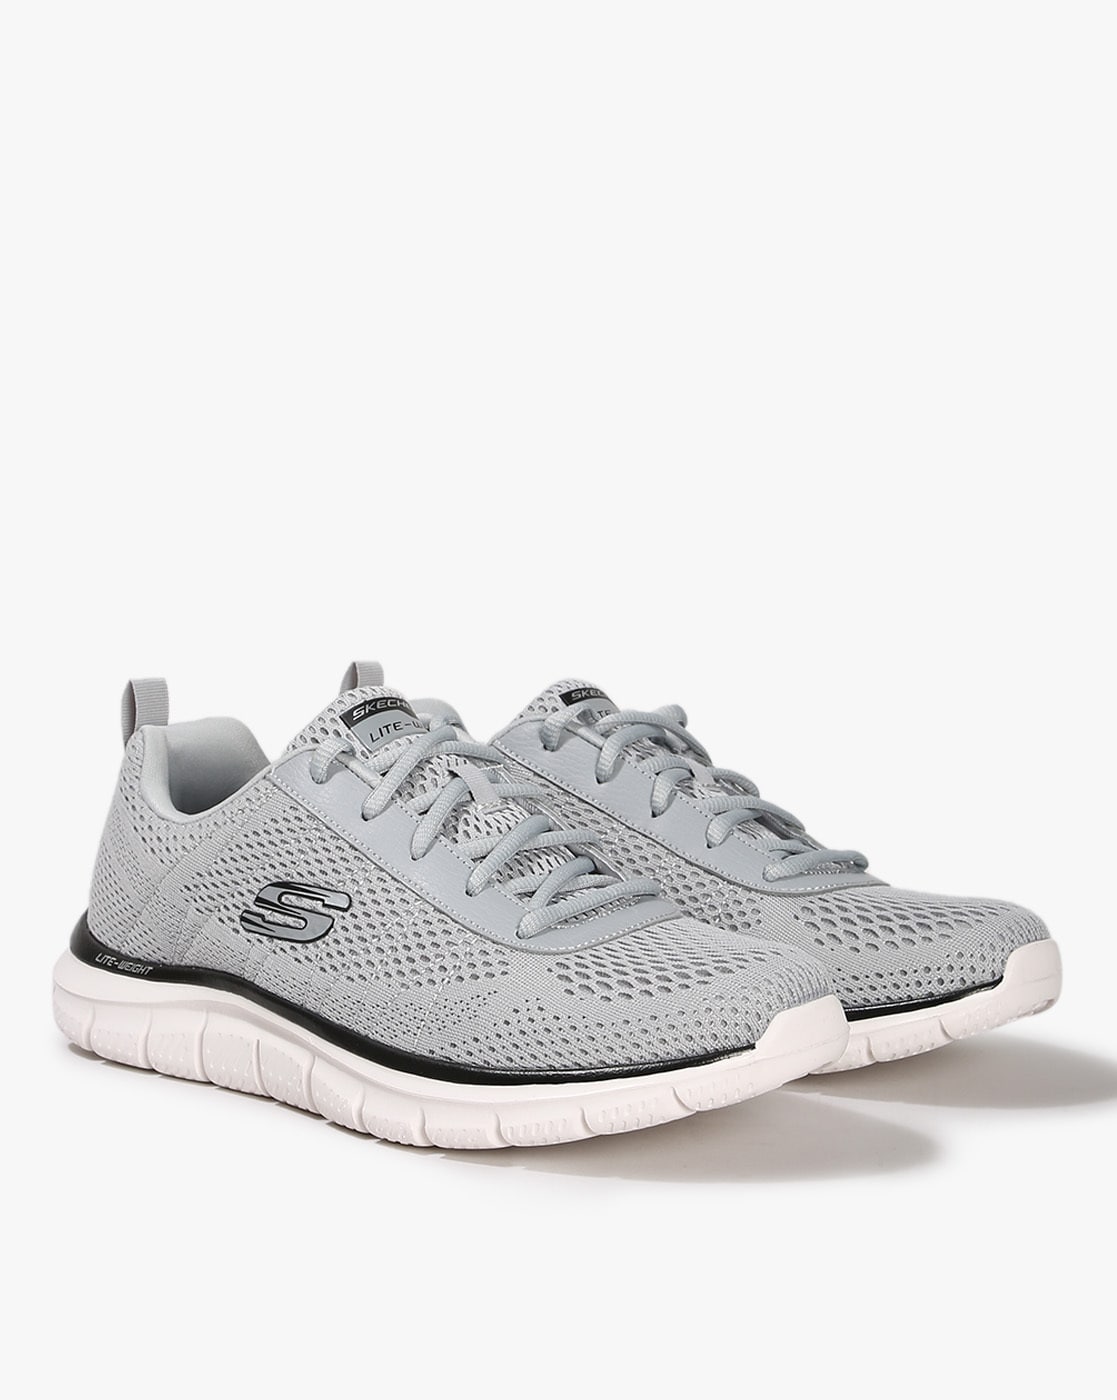 SKECHERS Sports Shoes & Sneakers : Buy SKECHERS MODENA Pink Casual shoes  Online | Nykaa Fashion.